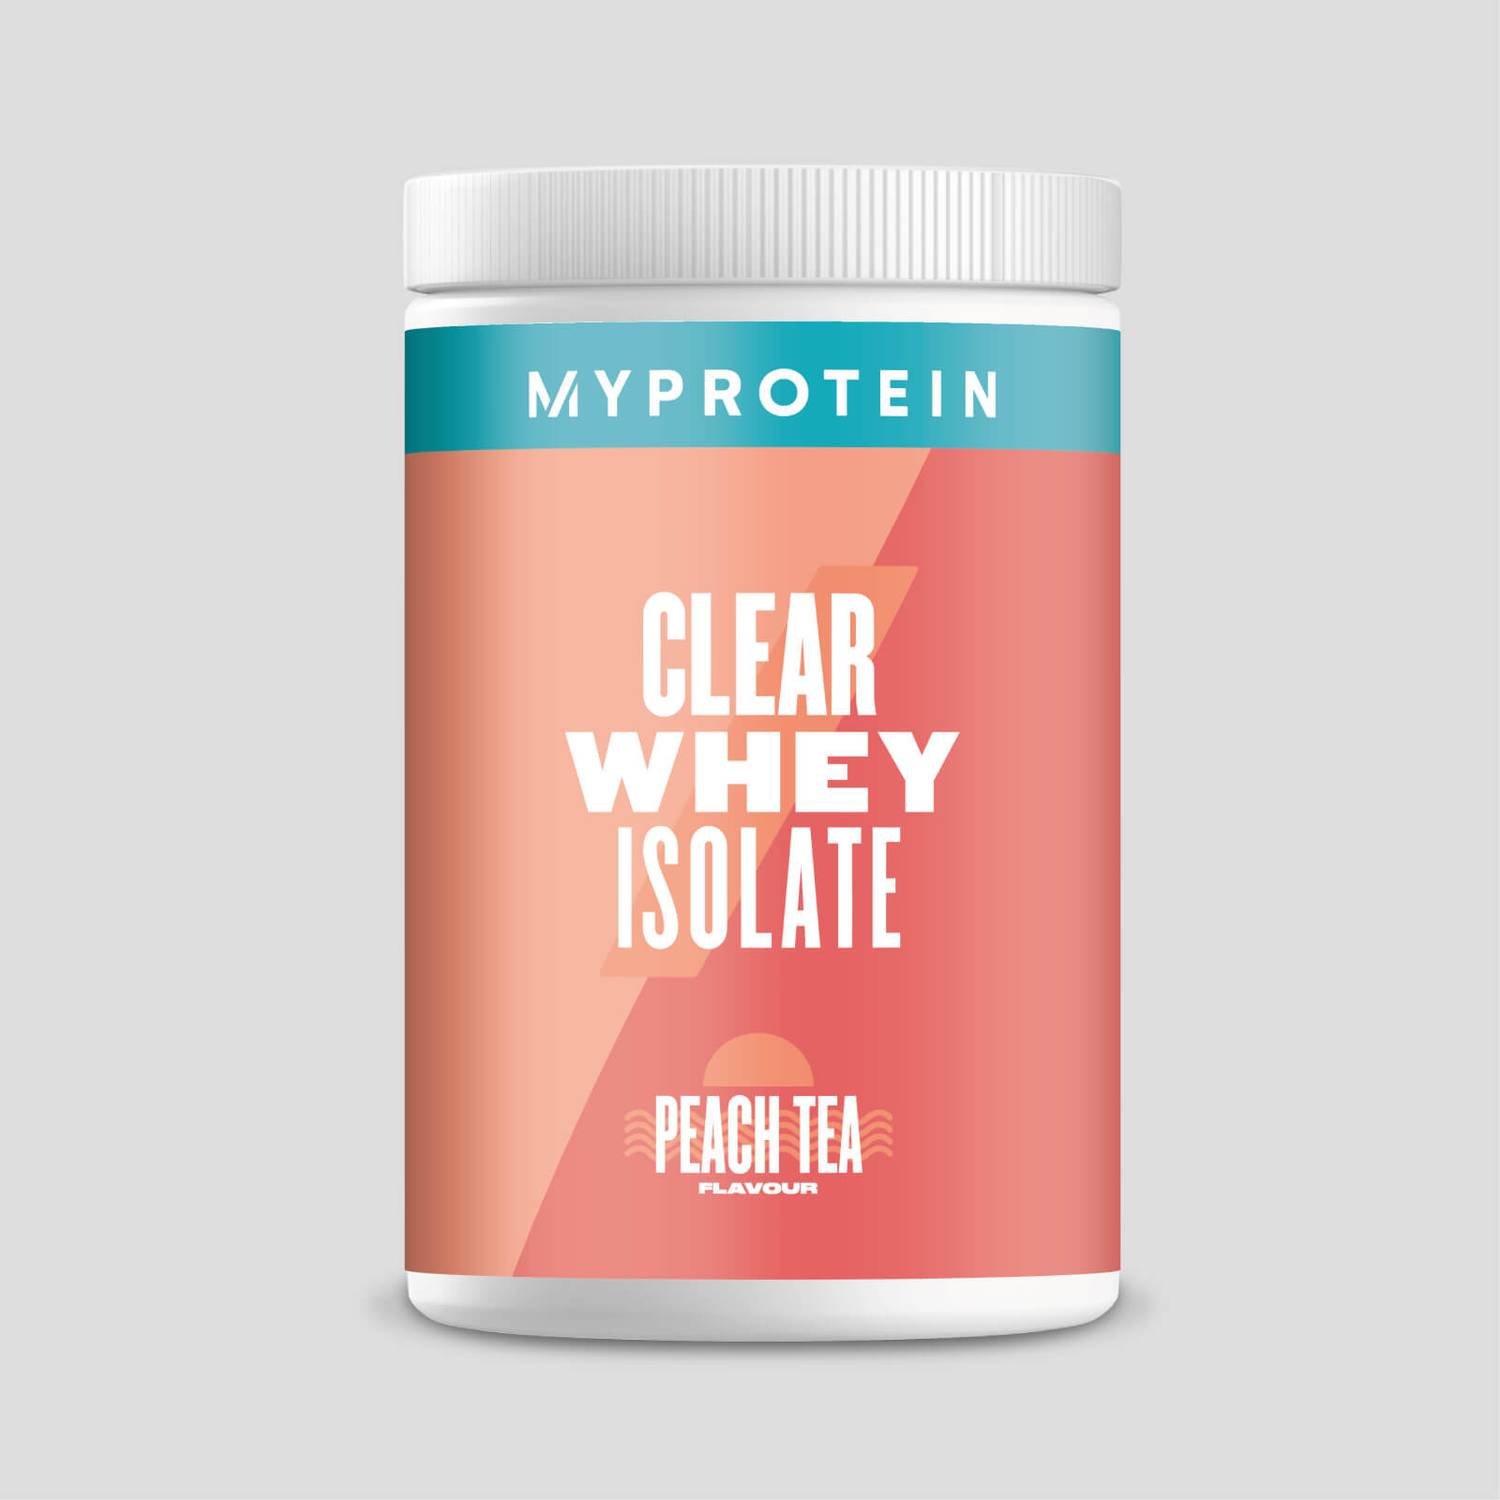 MyProteïn Clear Whey Isolate